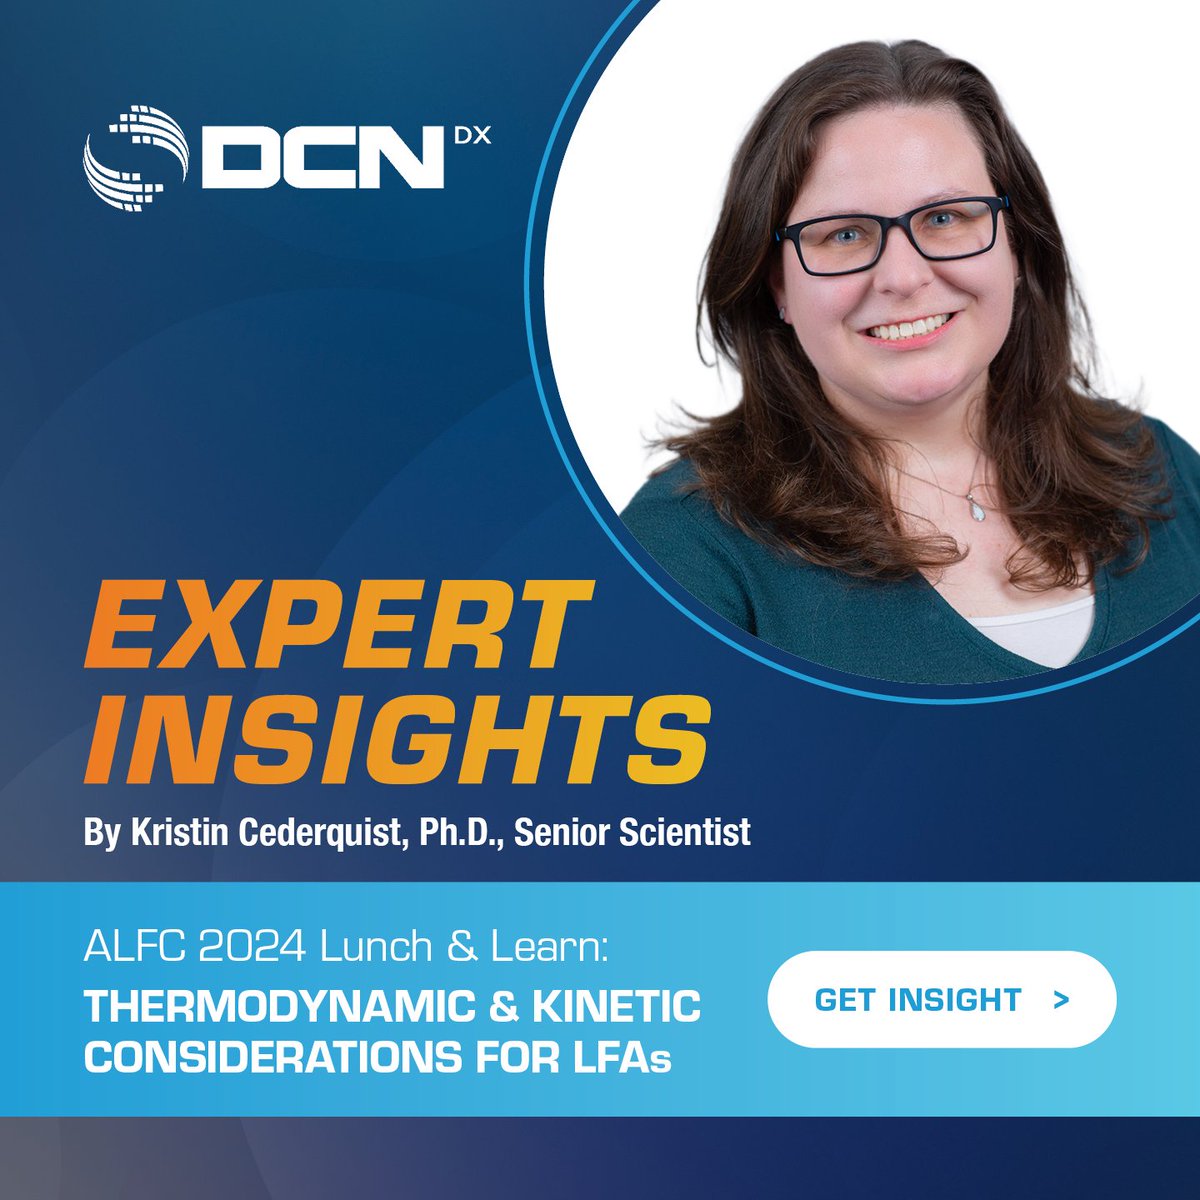 Watch Dr. Kristin Cederquist's insightful #ALFC2024 session on the roles of thermodynamics & kinetics in #LFA design. 🔬💡

Optimize your #LateralFlow #Assays with expert insights from #DCNDx.

Full video: hubs.ly/Q02twrlF0

#Diagnostics #IVD #SharingKnowledge